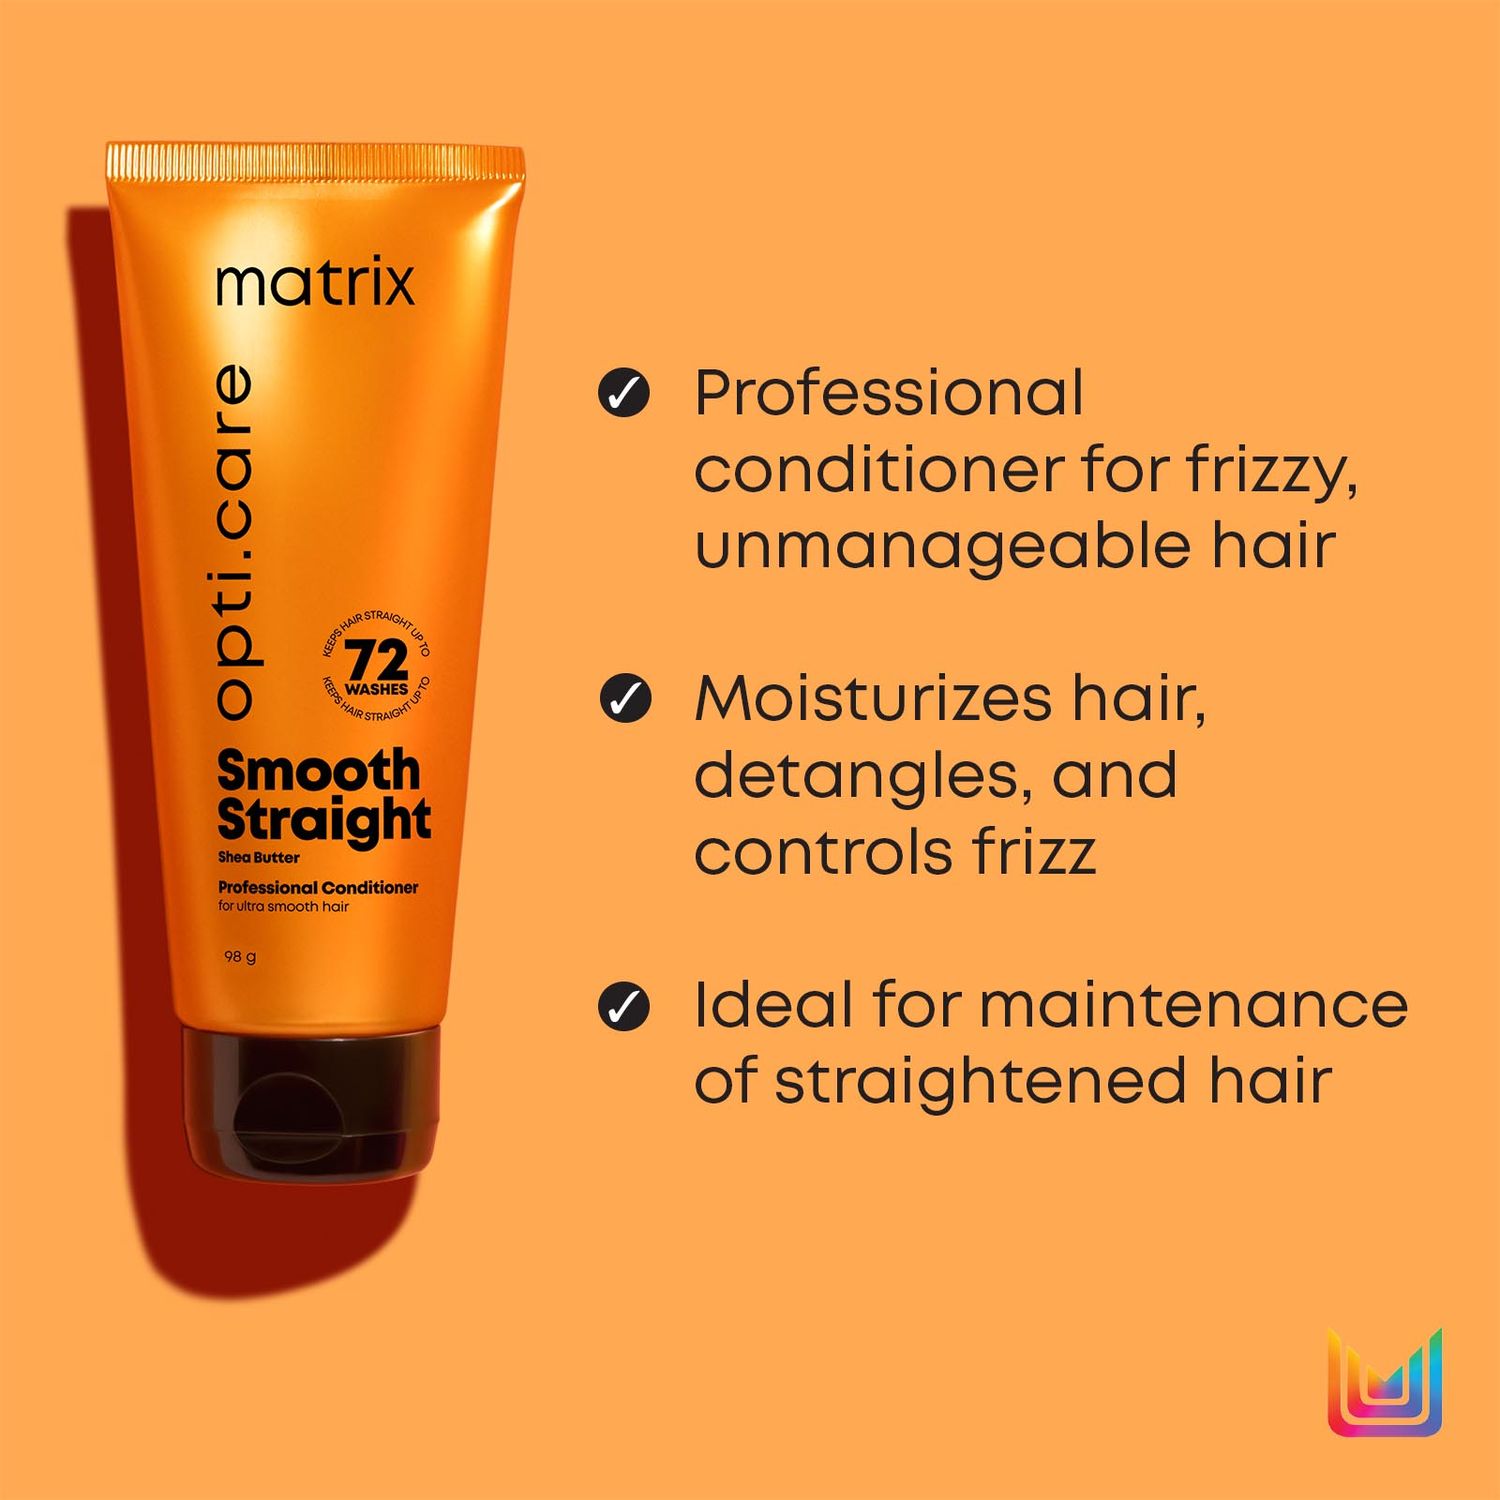 Matrix Opti Care Smooth Straight Professional Shampoo with Shea Butter  Frizzfree HairParaben Free Buy Matrix Opti Care Smooth Straight  Professional Shampoo with Shea Butter Frizzfree HairParaben Free Online  at Best Price in